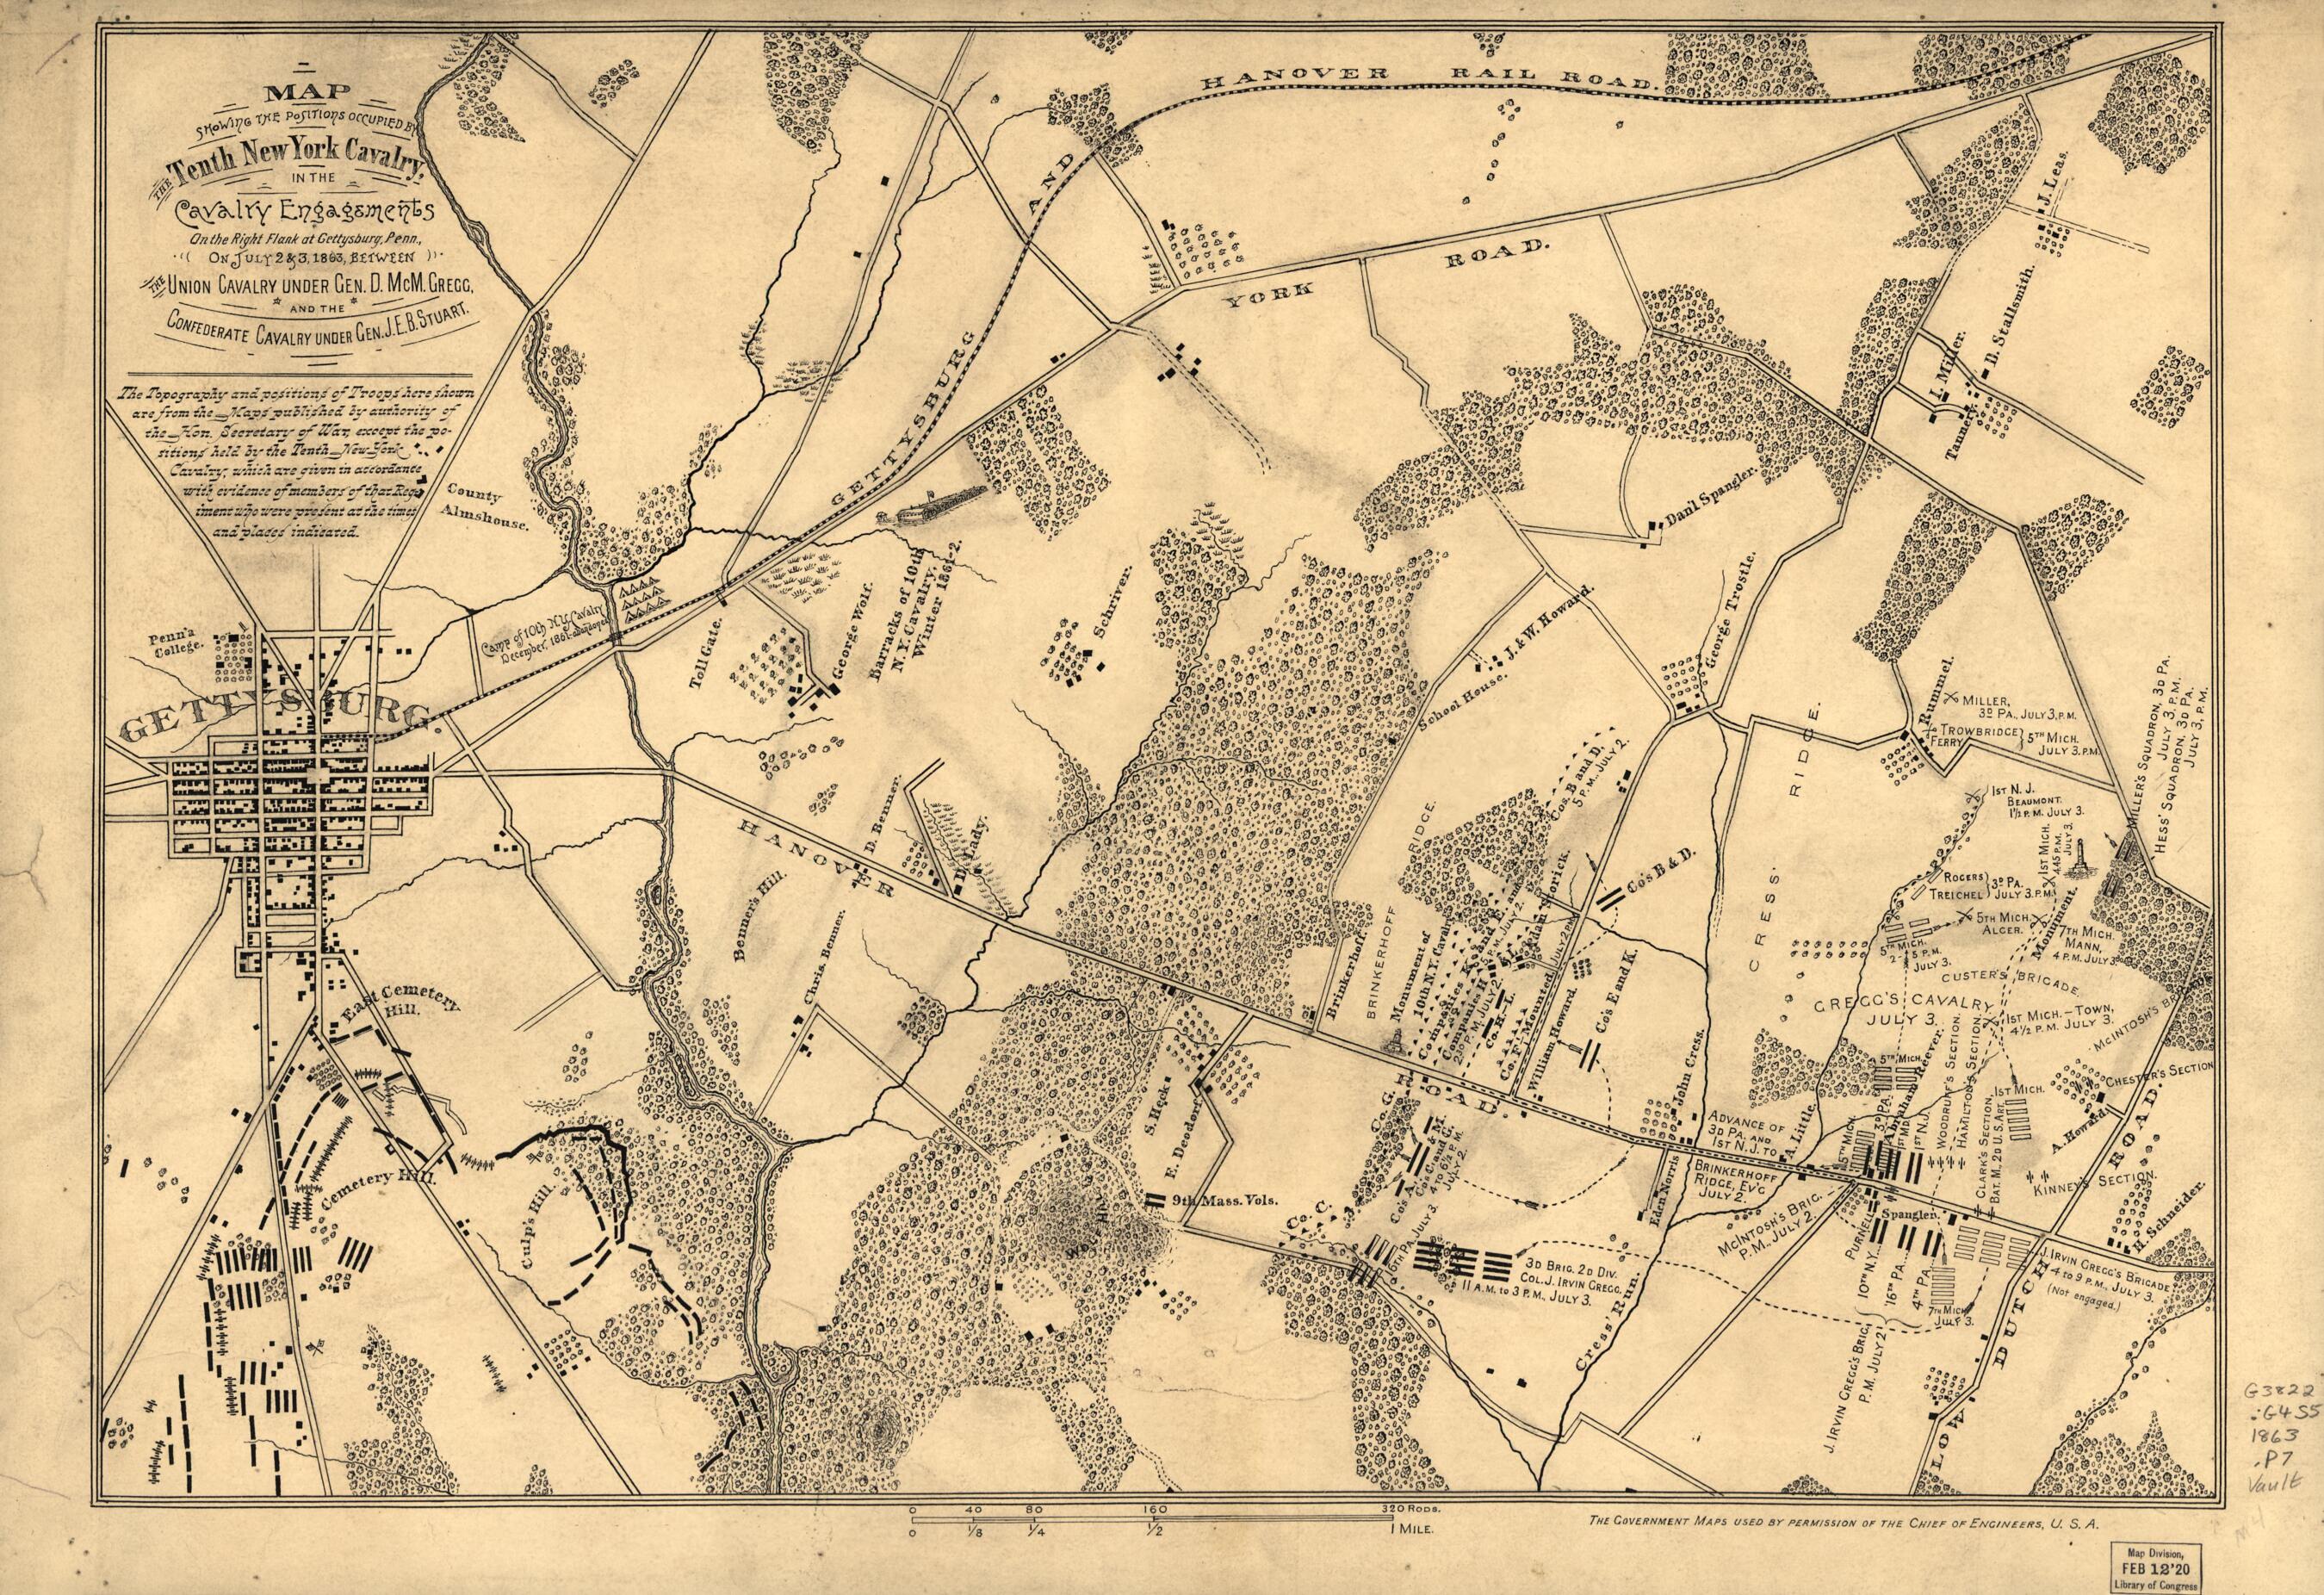 This old map of Map Showing the Positions Occupied by the Tenth New York Cavalry In the Cavalry Engagements On the Right Flank at Gettysburg, Pennsylvania : On July 2 &amp; 3, from 1863, Between the Union Cavalry Under Gen. D. McM. Gregg and the Confederate 